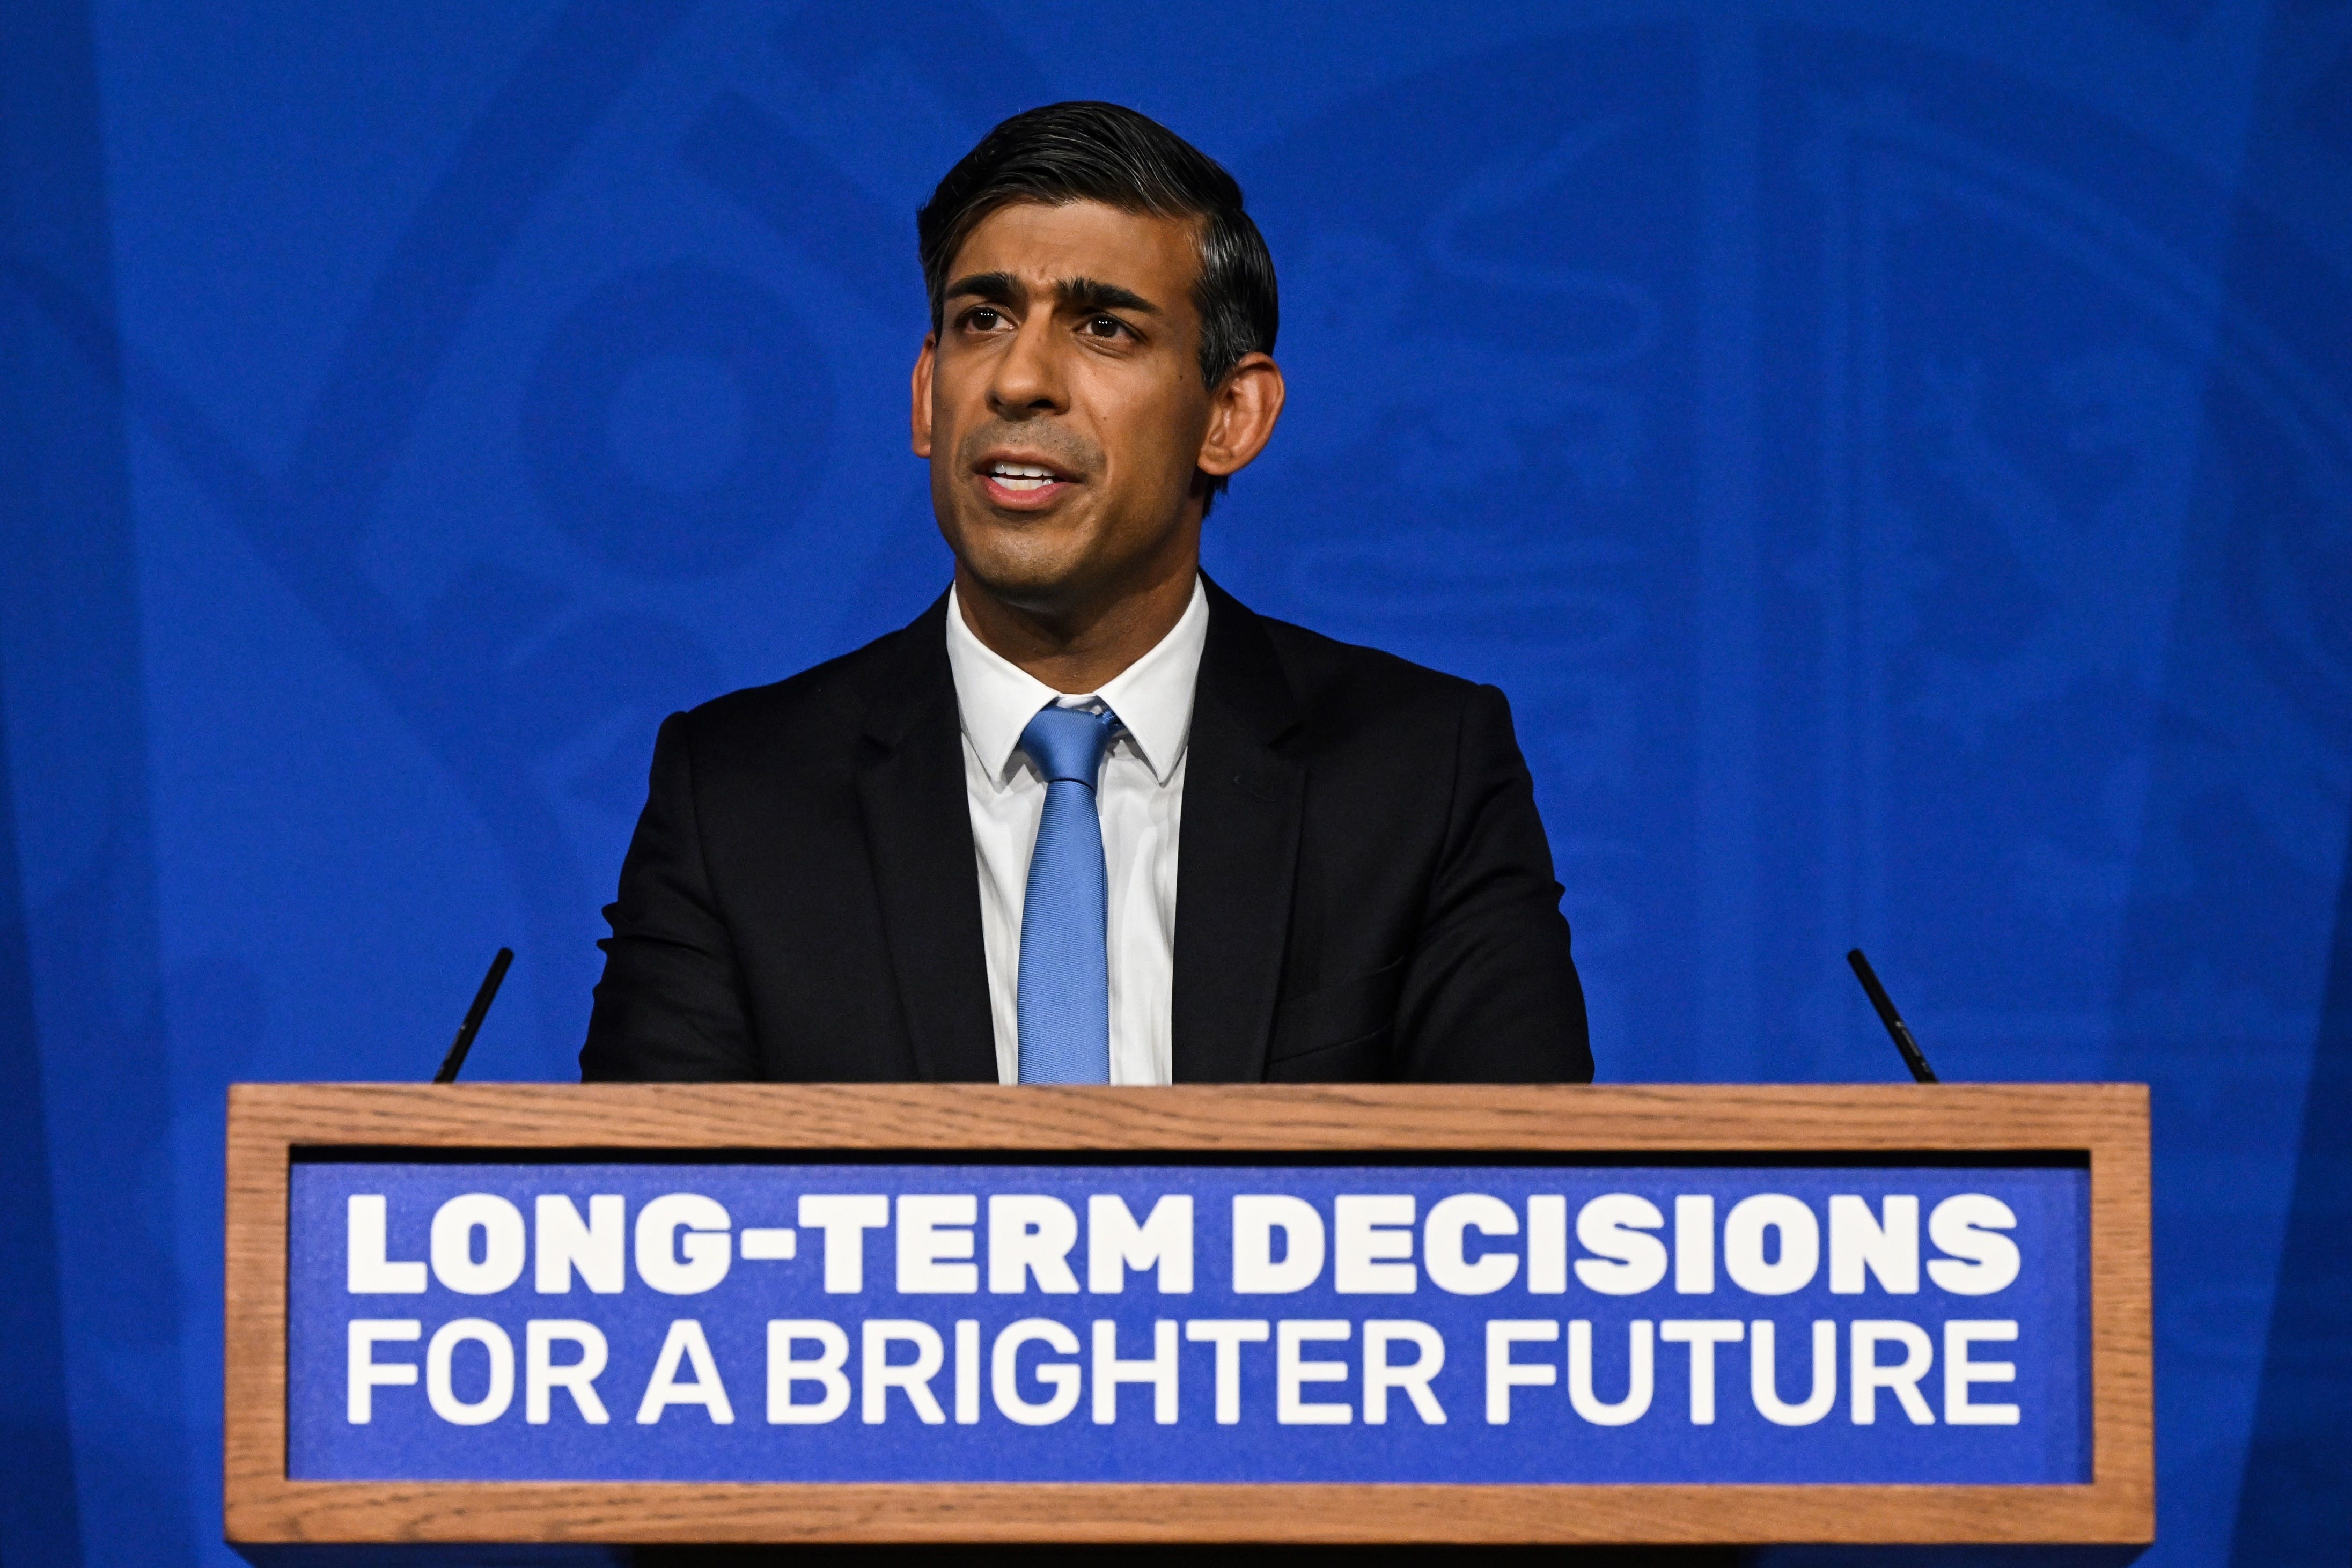 The conference’s slogan will be ‘long-term decisions for a brighter future’